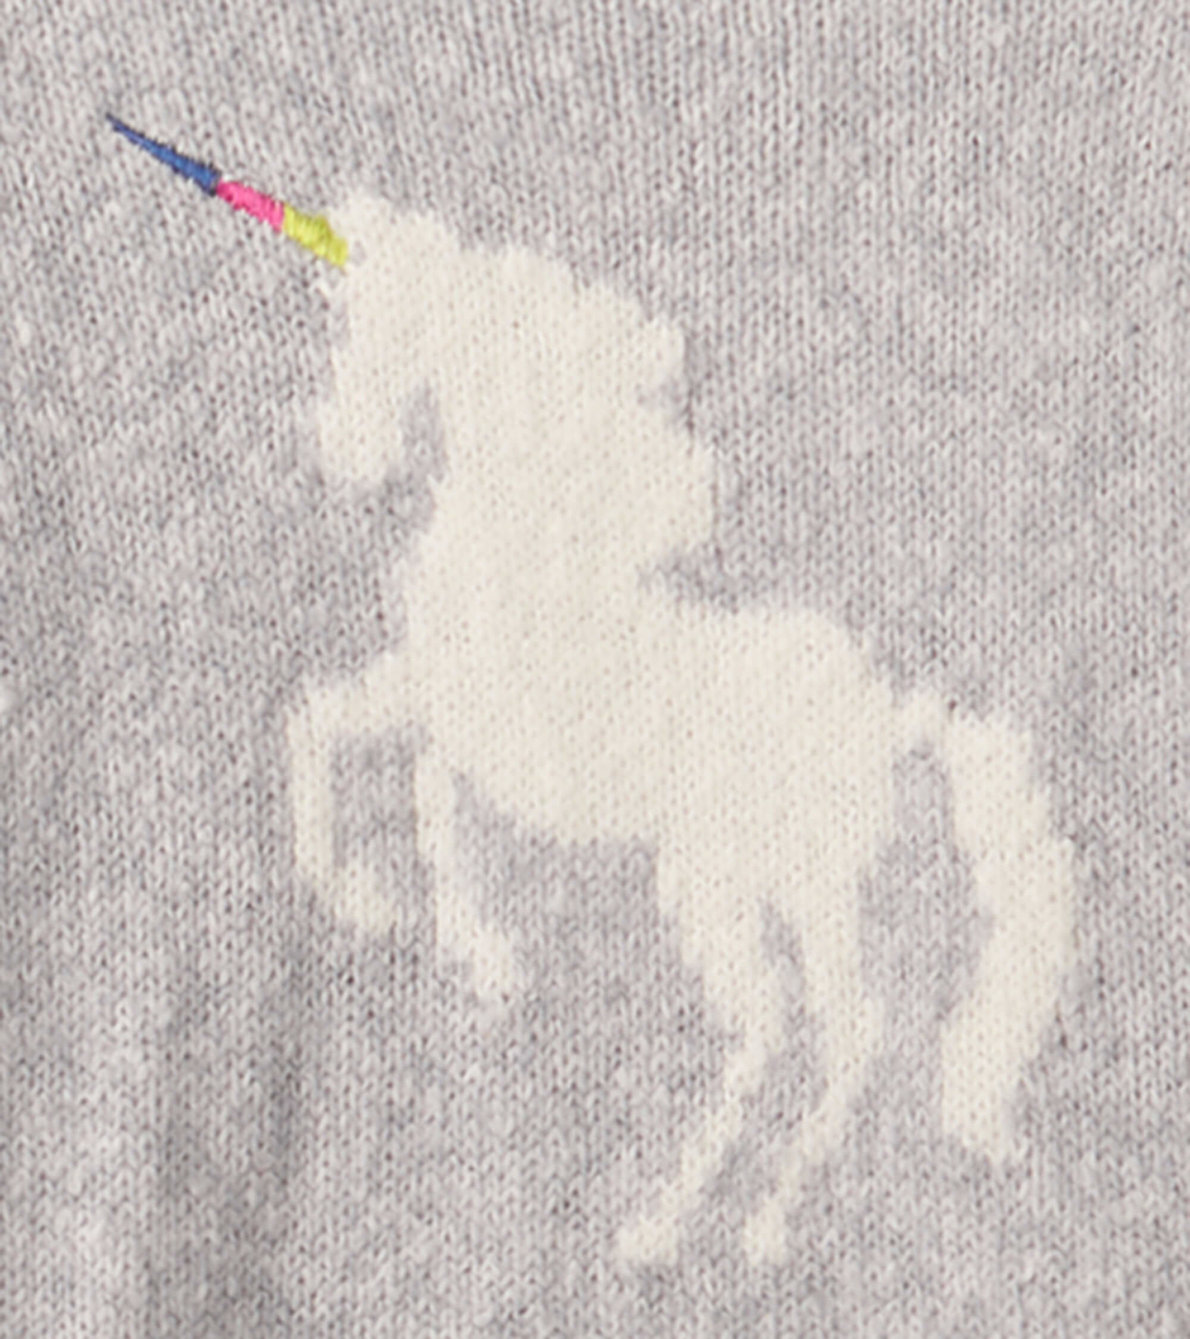 View larger image of Unicorn A-Line Sweater Dress